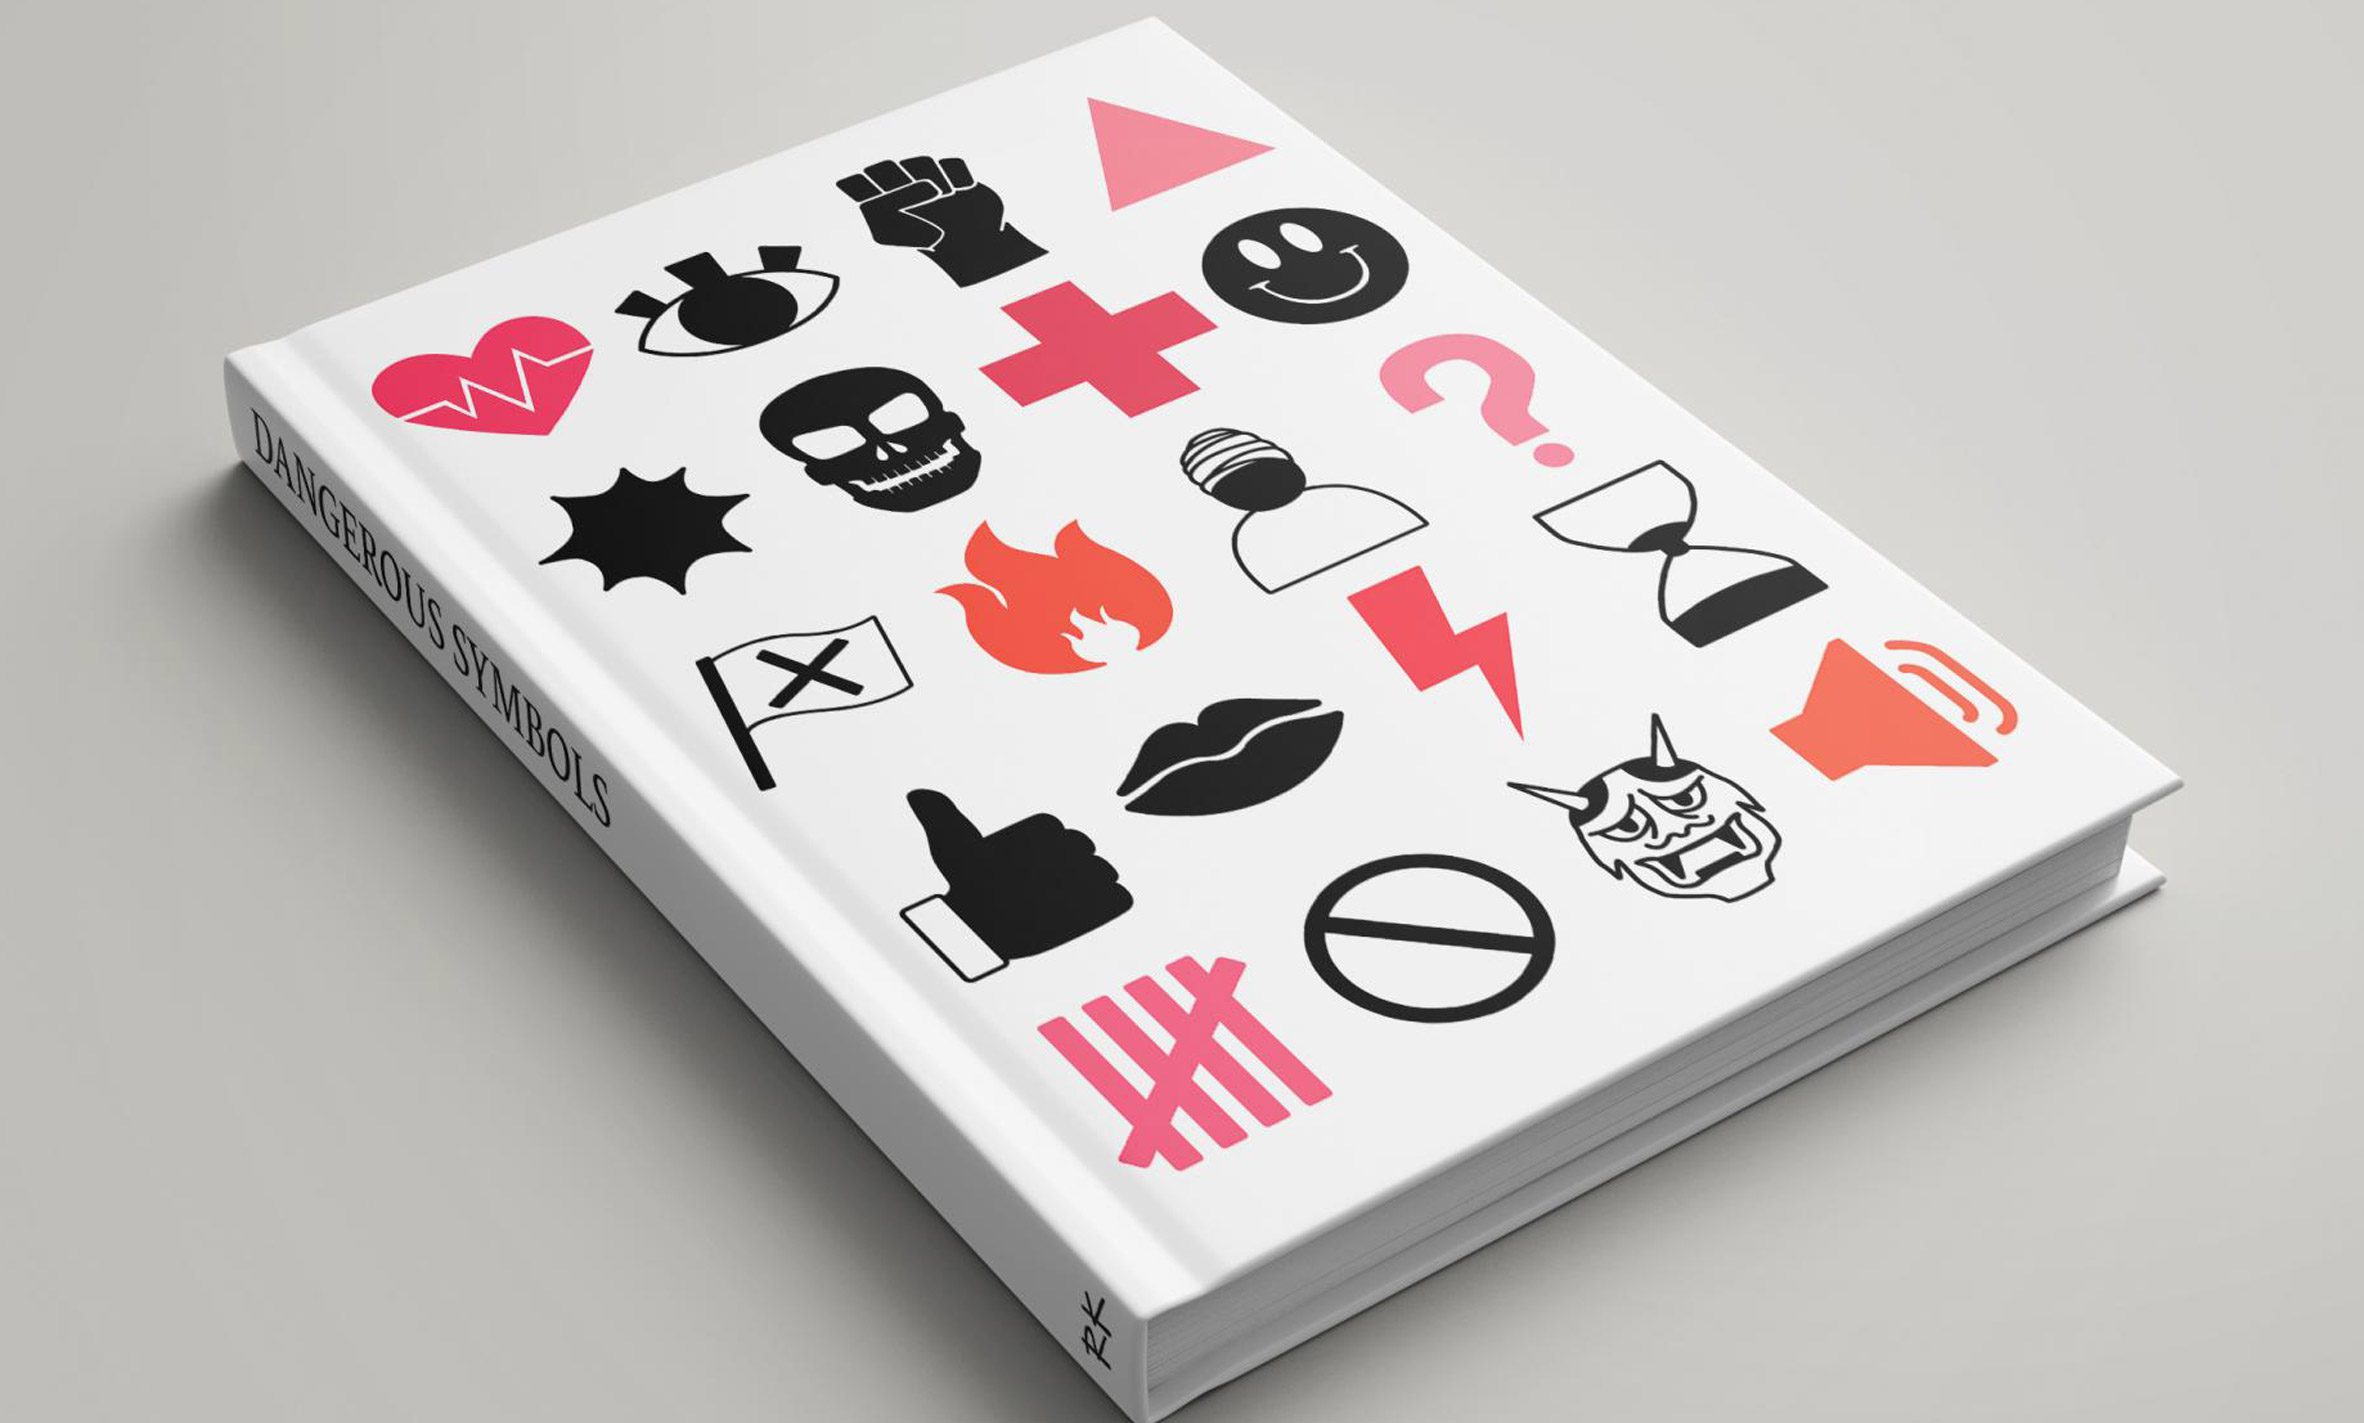 A graphic design book with various symbols on its cover